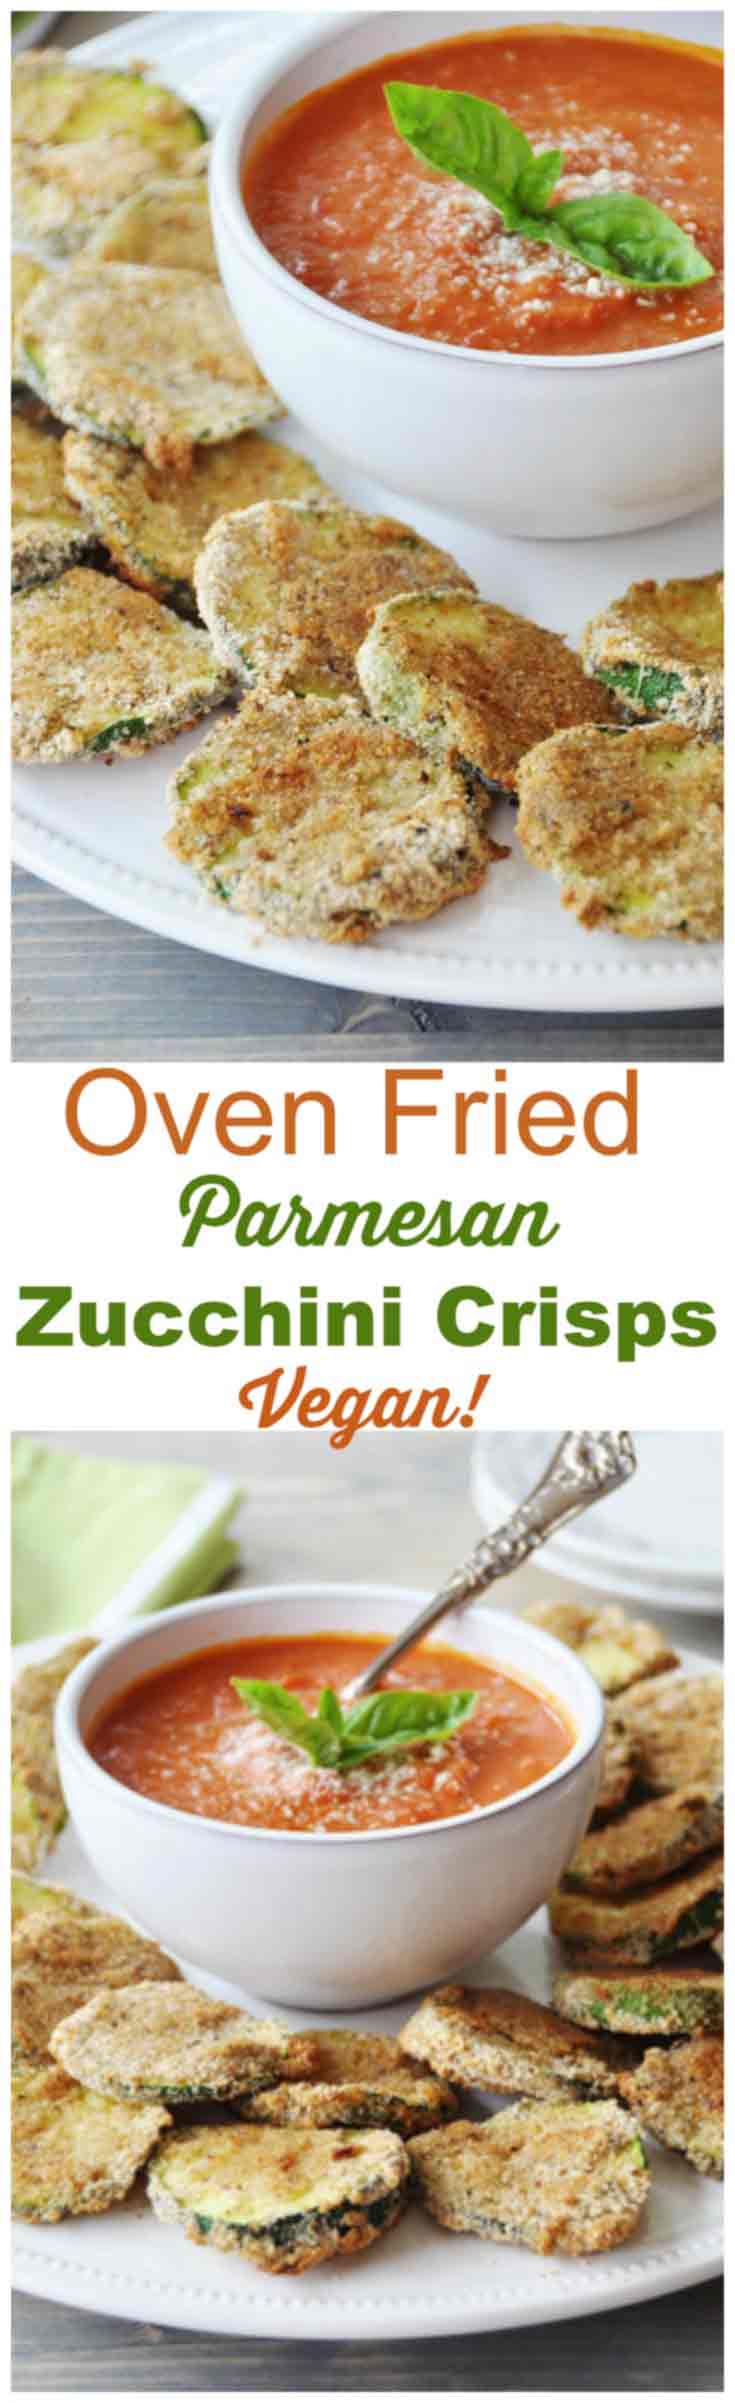 Oven Fried Parmesan Zucchini Crisps! They're crispy, crunchy, and delicious. They're also vegan! The perfect appetizer recipe. www.veganosity.com